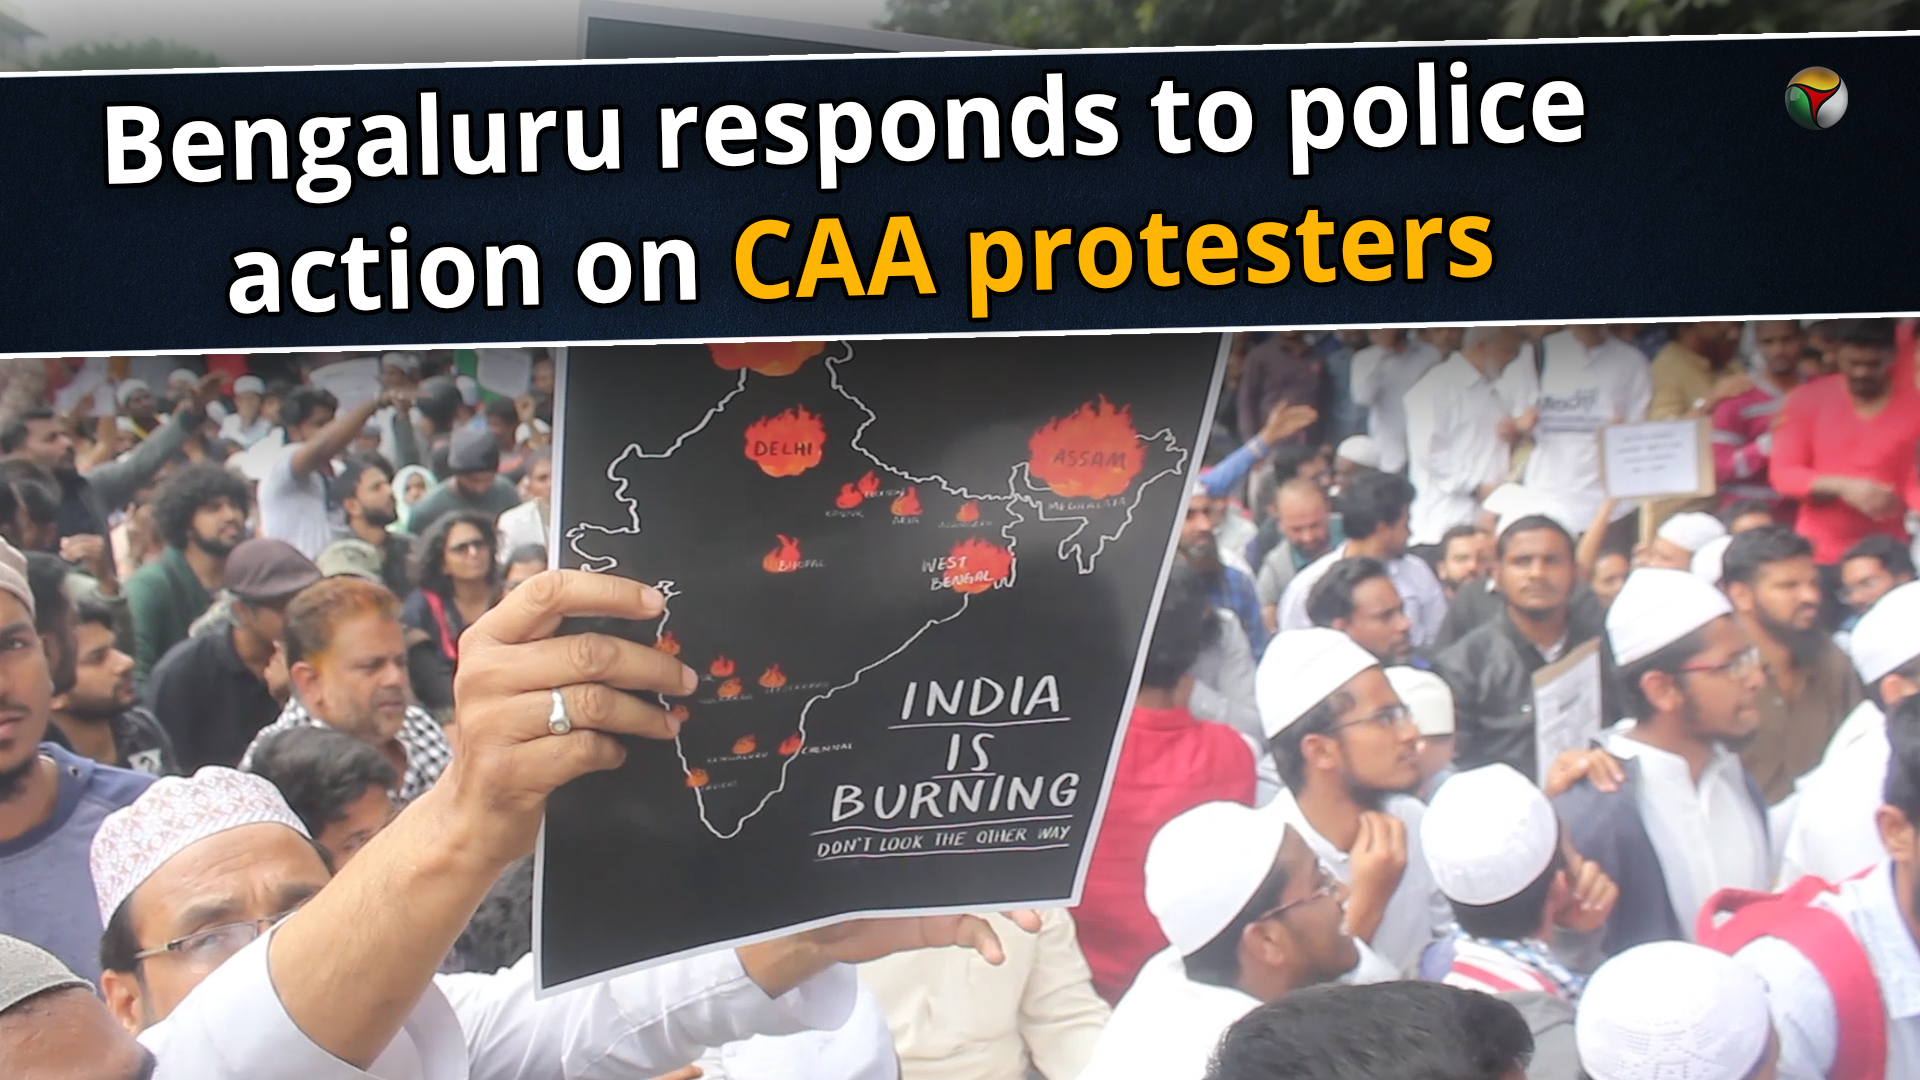 Bengaluru reacts to police action on CAA protesters